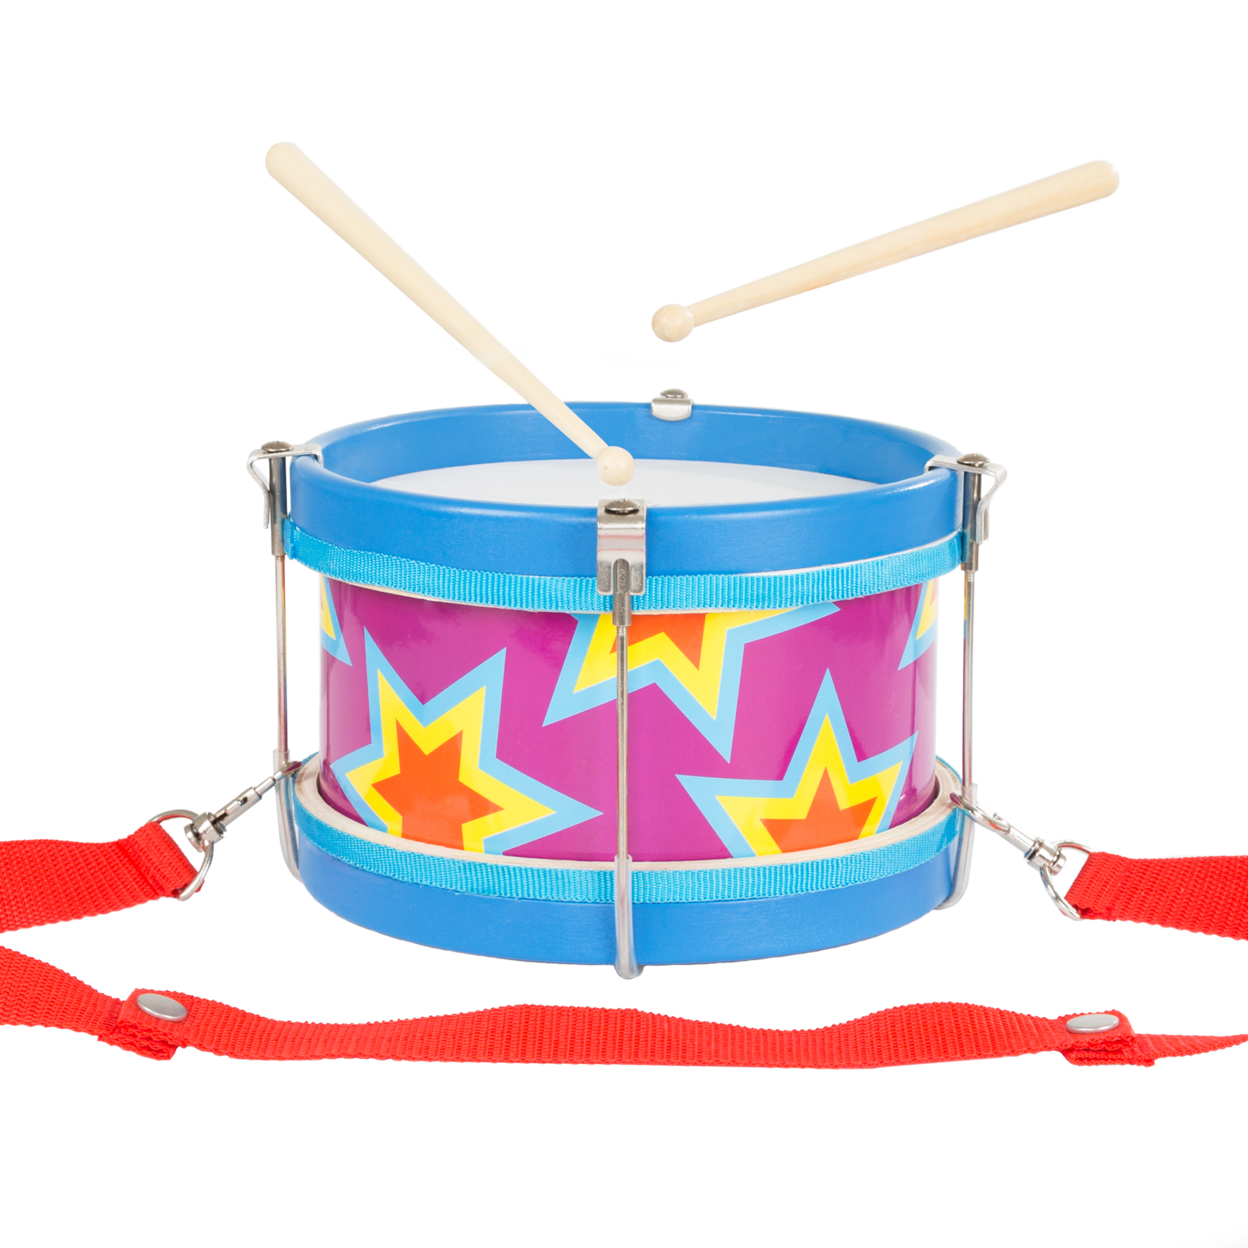 Children’s Toy Snare Marching Drum, Double-Sided With Adjustable Neck Strap And Two Wood Drum Sticks- Music Fun For Kids